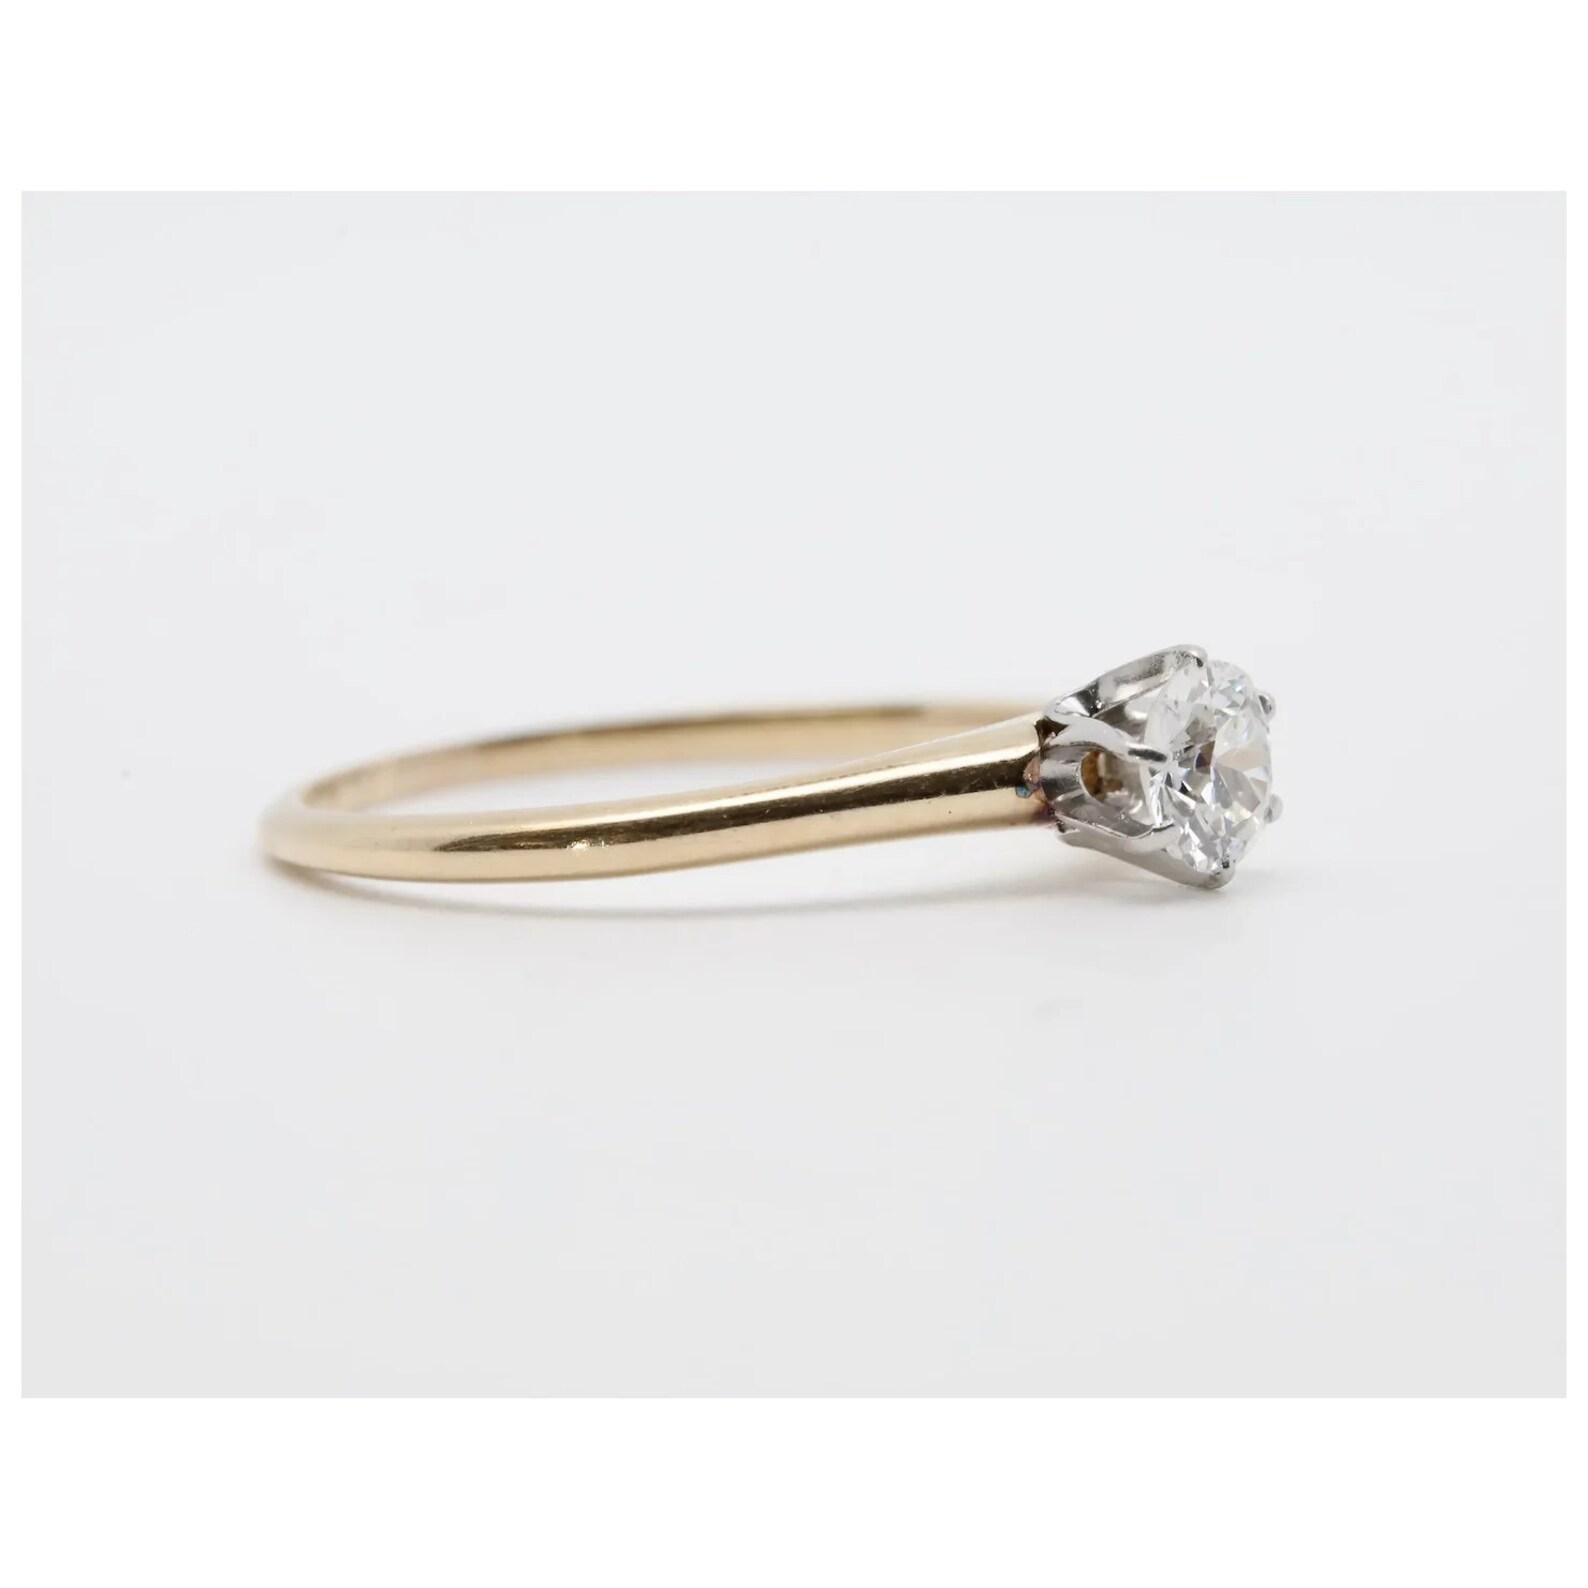 An original Edwardian period old European cut diamond ring in 14 karat yellow gold and platinum. Centered by a 0.45 carat H color SI2 clarity old European cut diamond set in a platinum mount.

In excellent condition, this ring is a size 7US and is